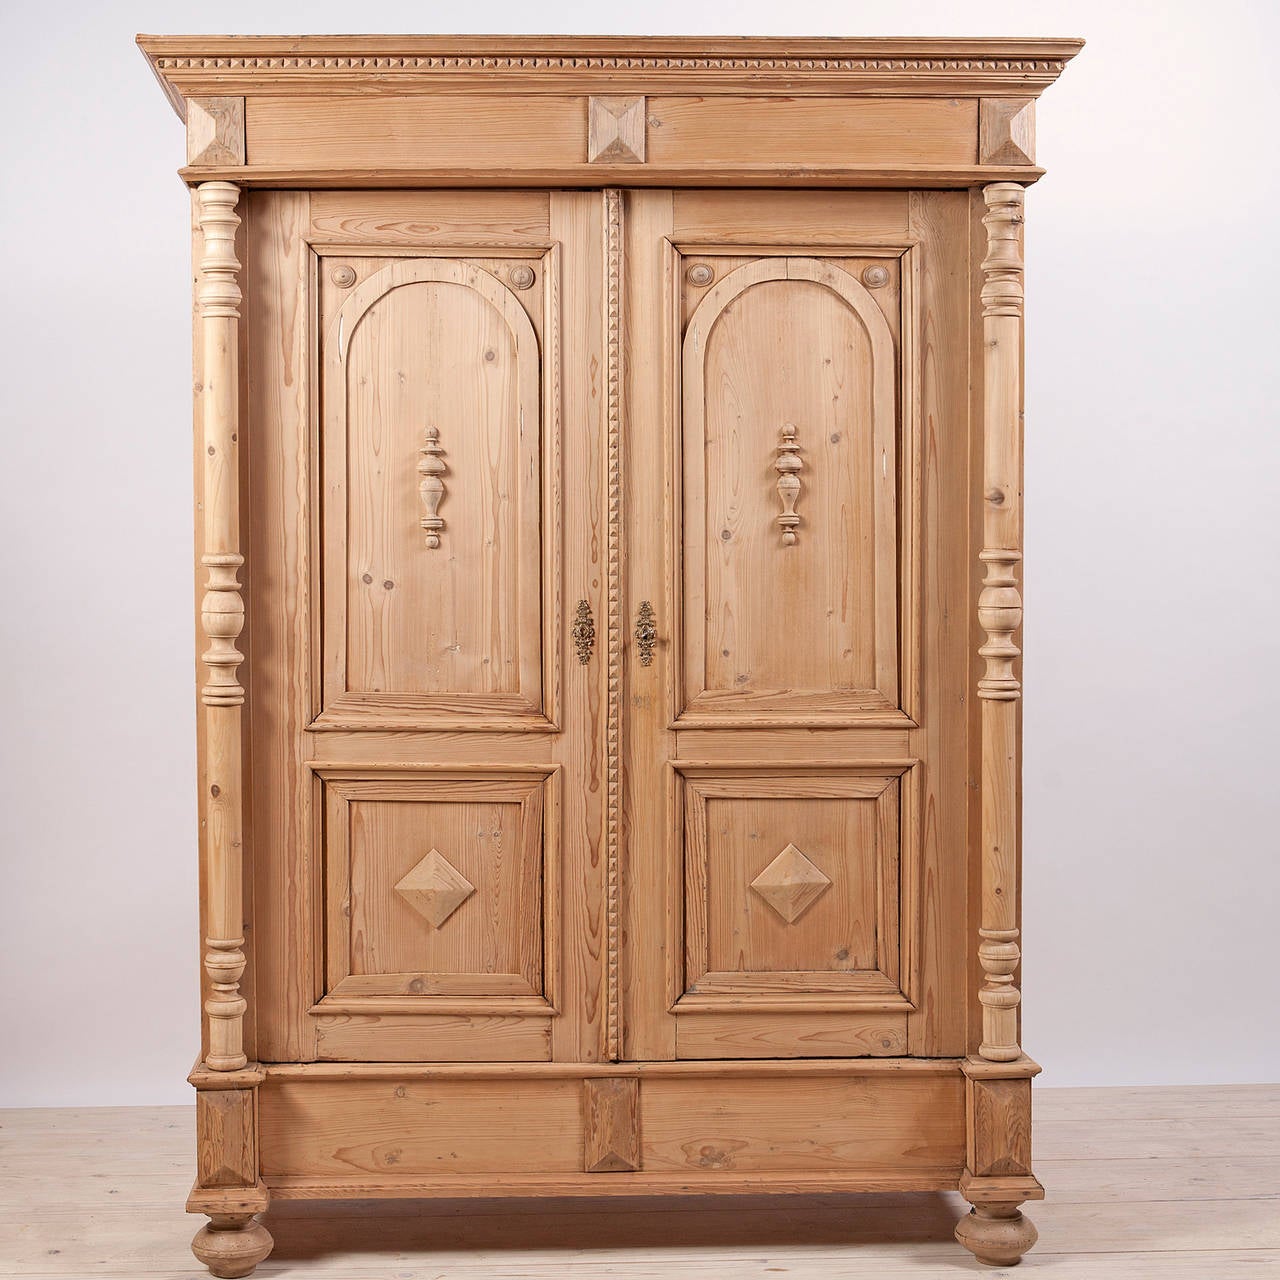 A European 2 door pine armoire with full columns and turned bun feet. Paneled doors feature appliques and interior has adjustable shelving. From the German Grunderzeit period c. 1895

Measures: 60